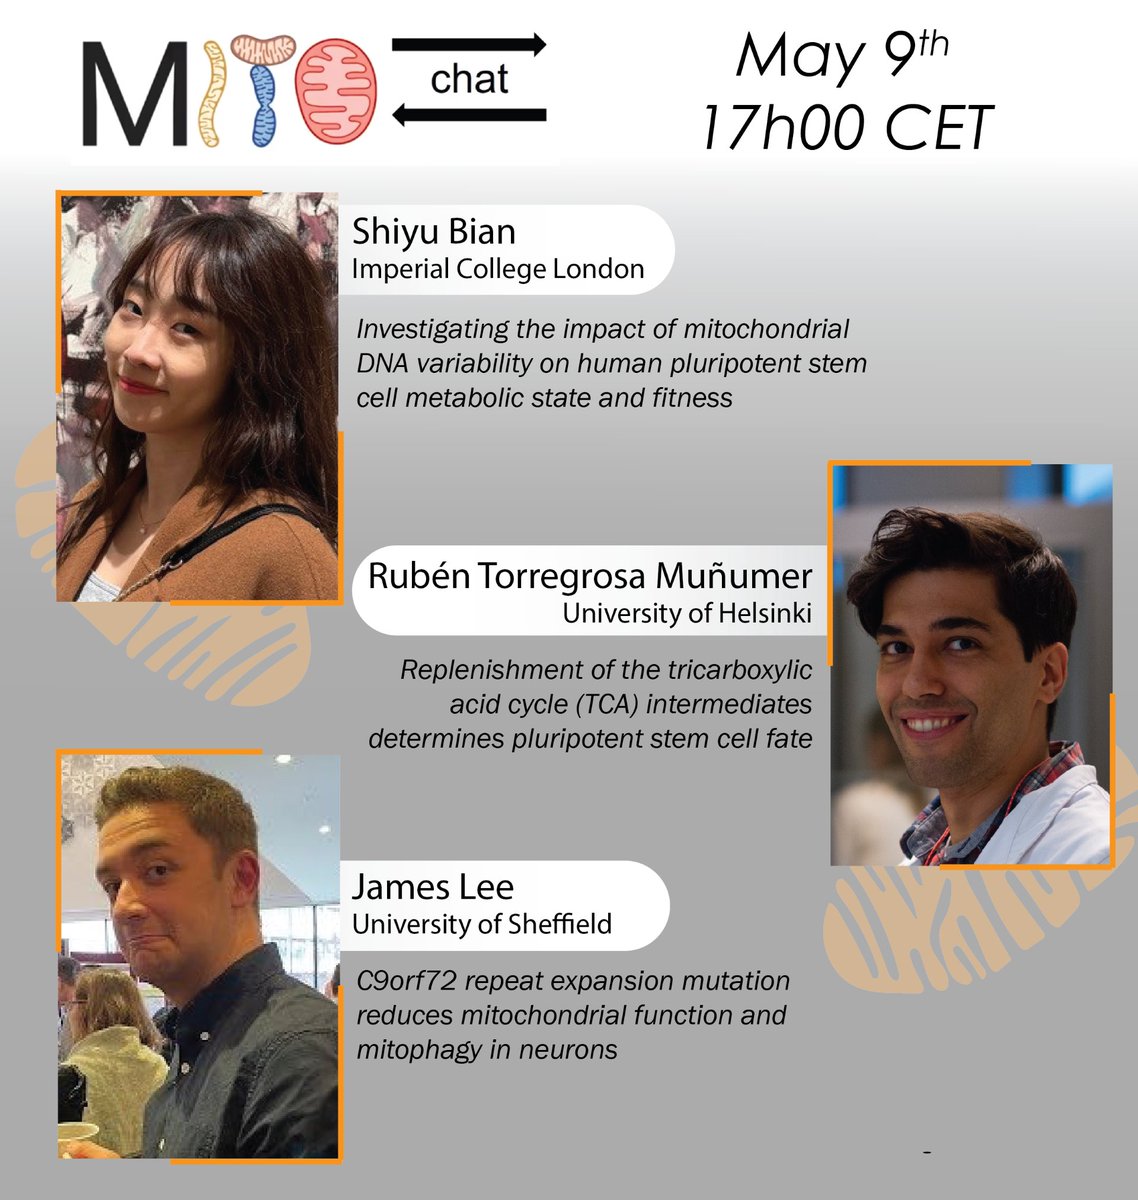 MITOchats are back this Thursday! Please join us for three short talks presented by Shiyu Bian, Rubén Torregrosa Muñumer @RuTorregrosa and James Lee @NeuronalLee. Zoom link now available on mitotalks.org